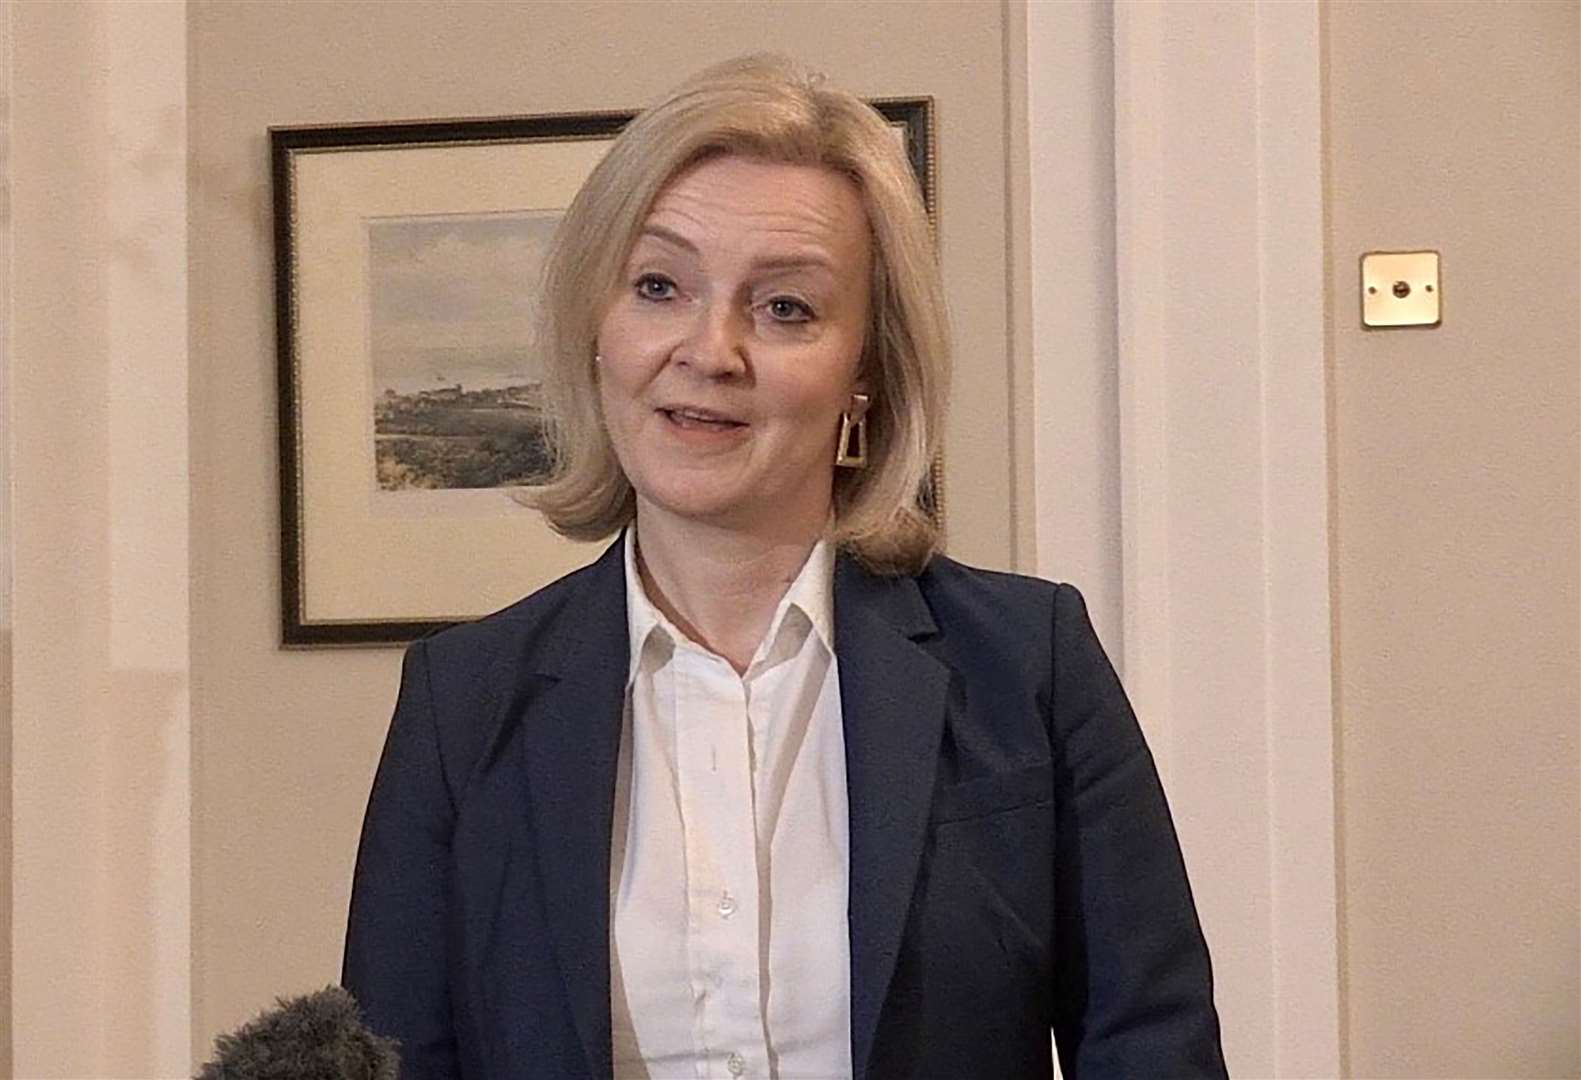 Foreign Secretary Liz Truss said on Thursday that she expected the Sue Gray report to be published in full, but could not say when it would be made public (Jonathan McCambridge/PA)